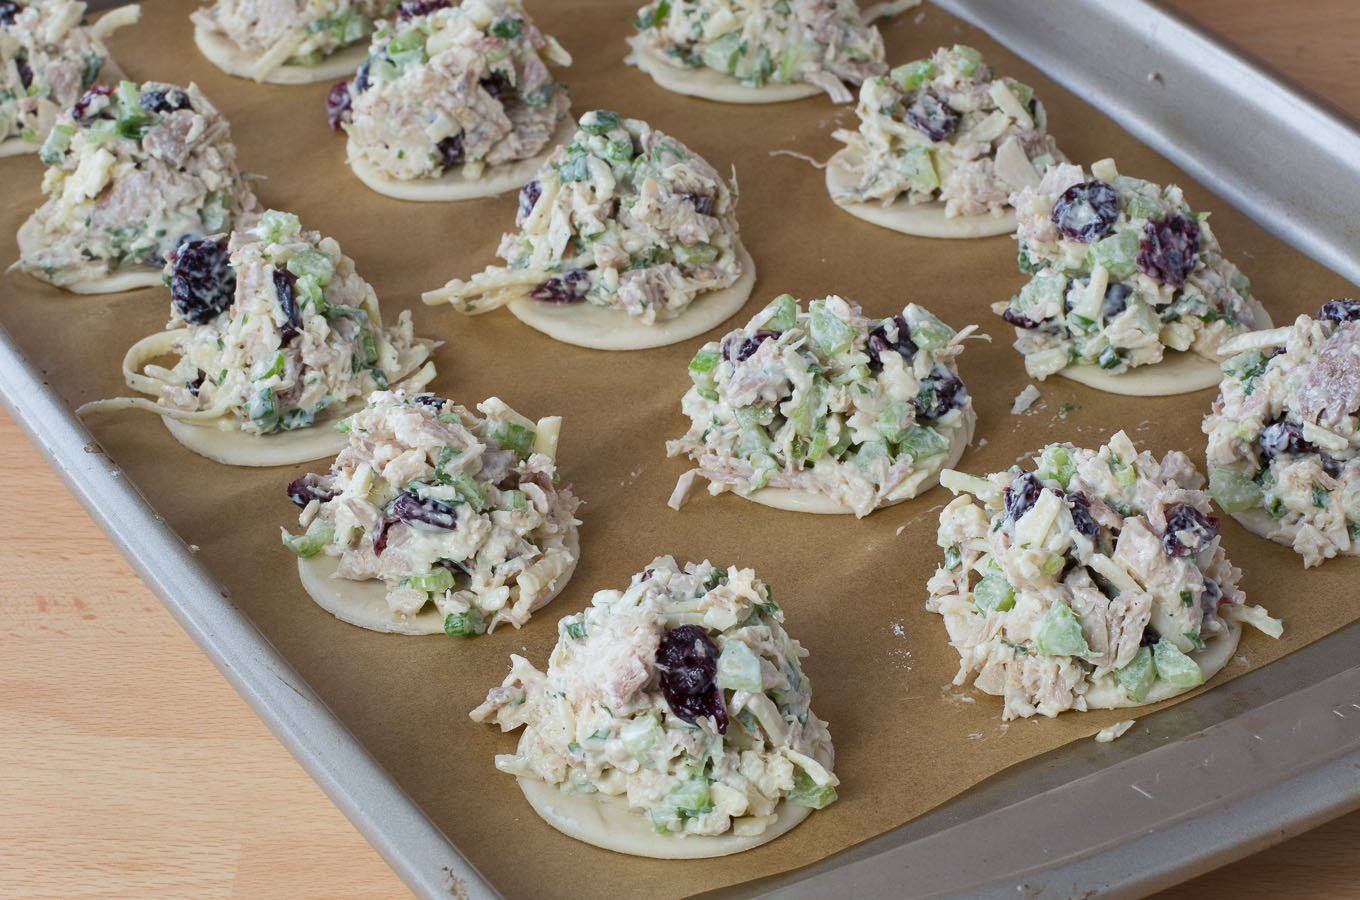 Bites of puffed pastry topped with turkey salad mix and cranberries.